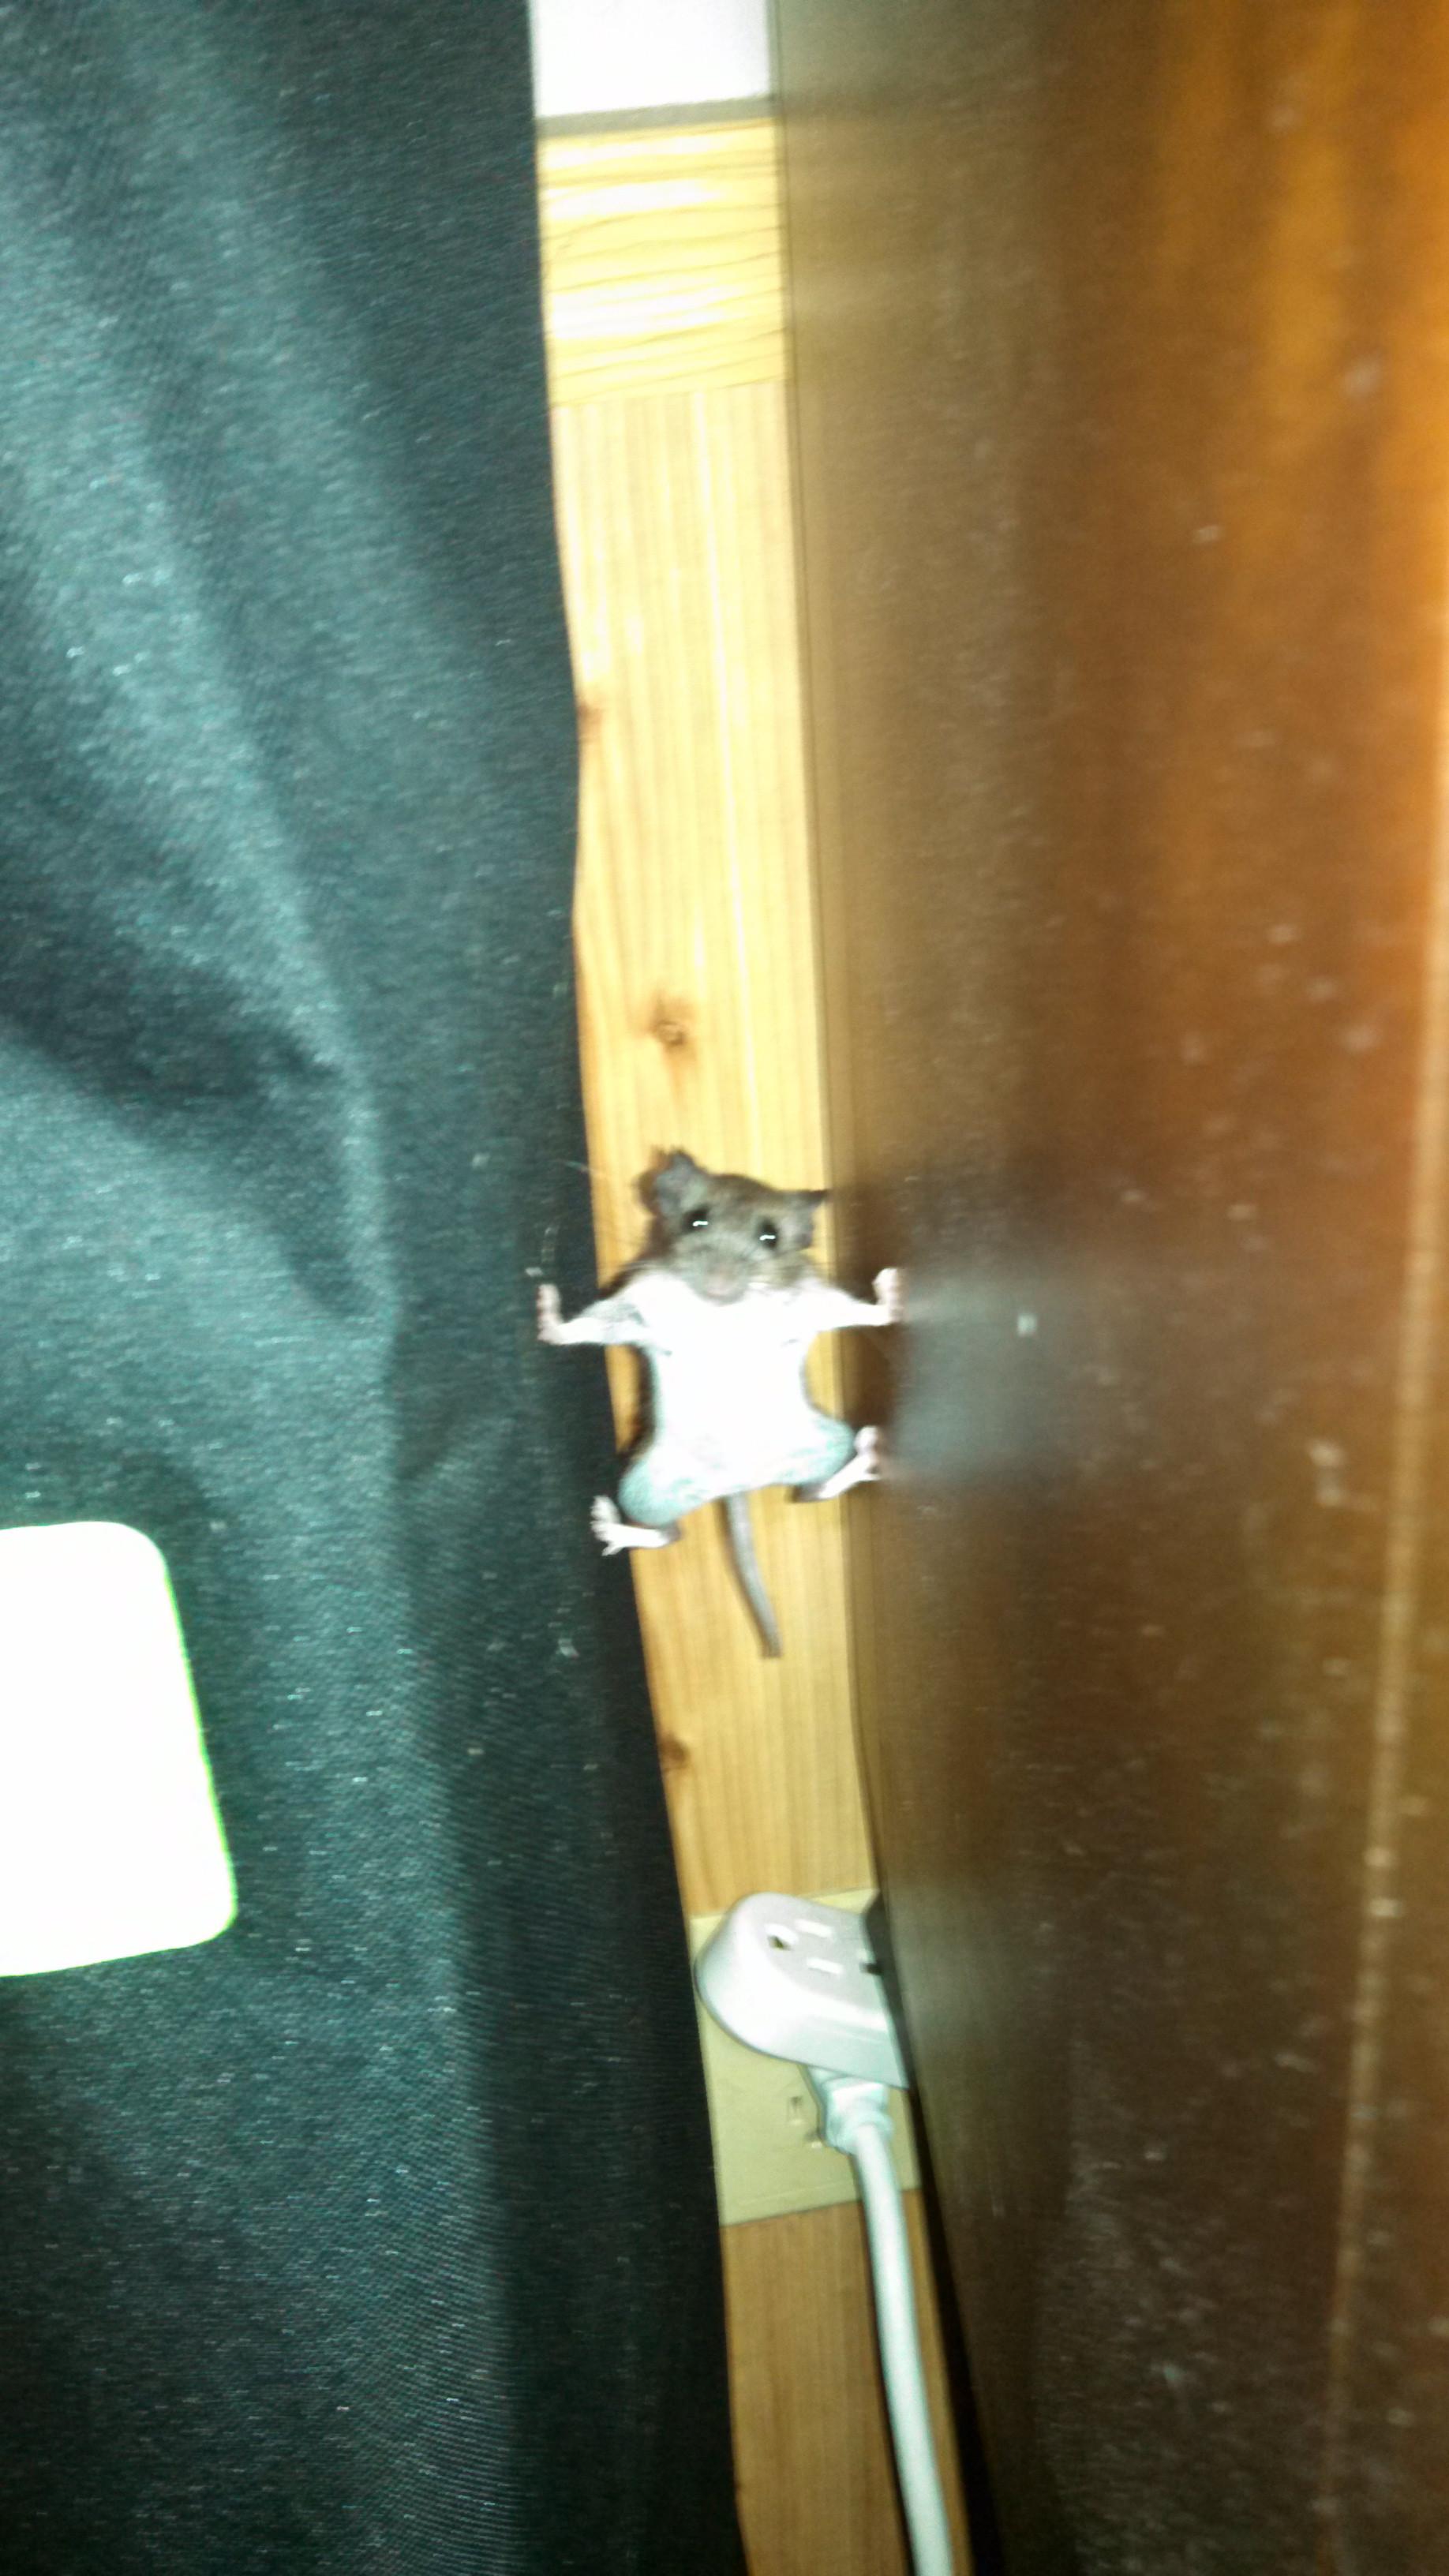 a mouse that went into mission impossible mode in my house last year.